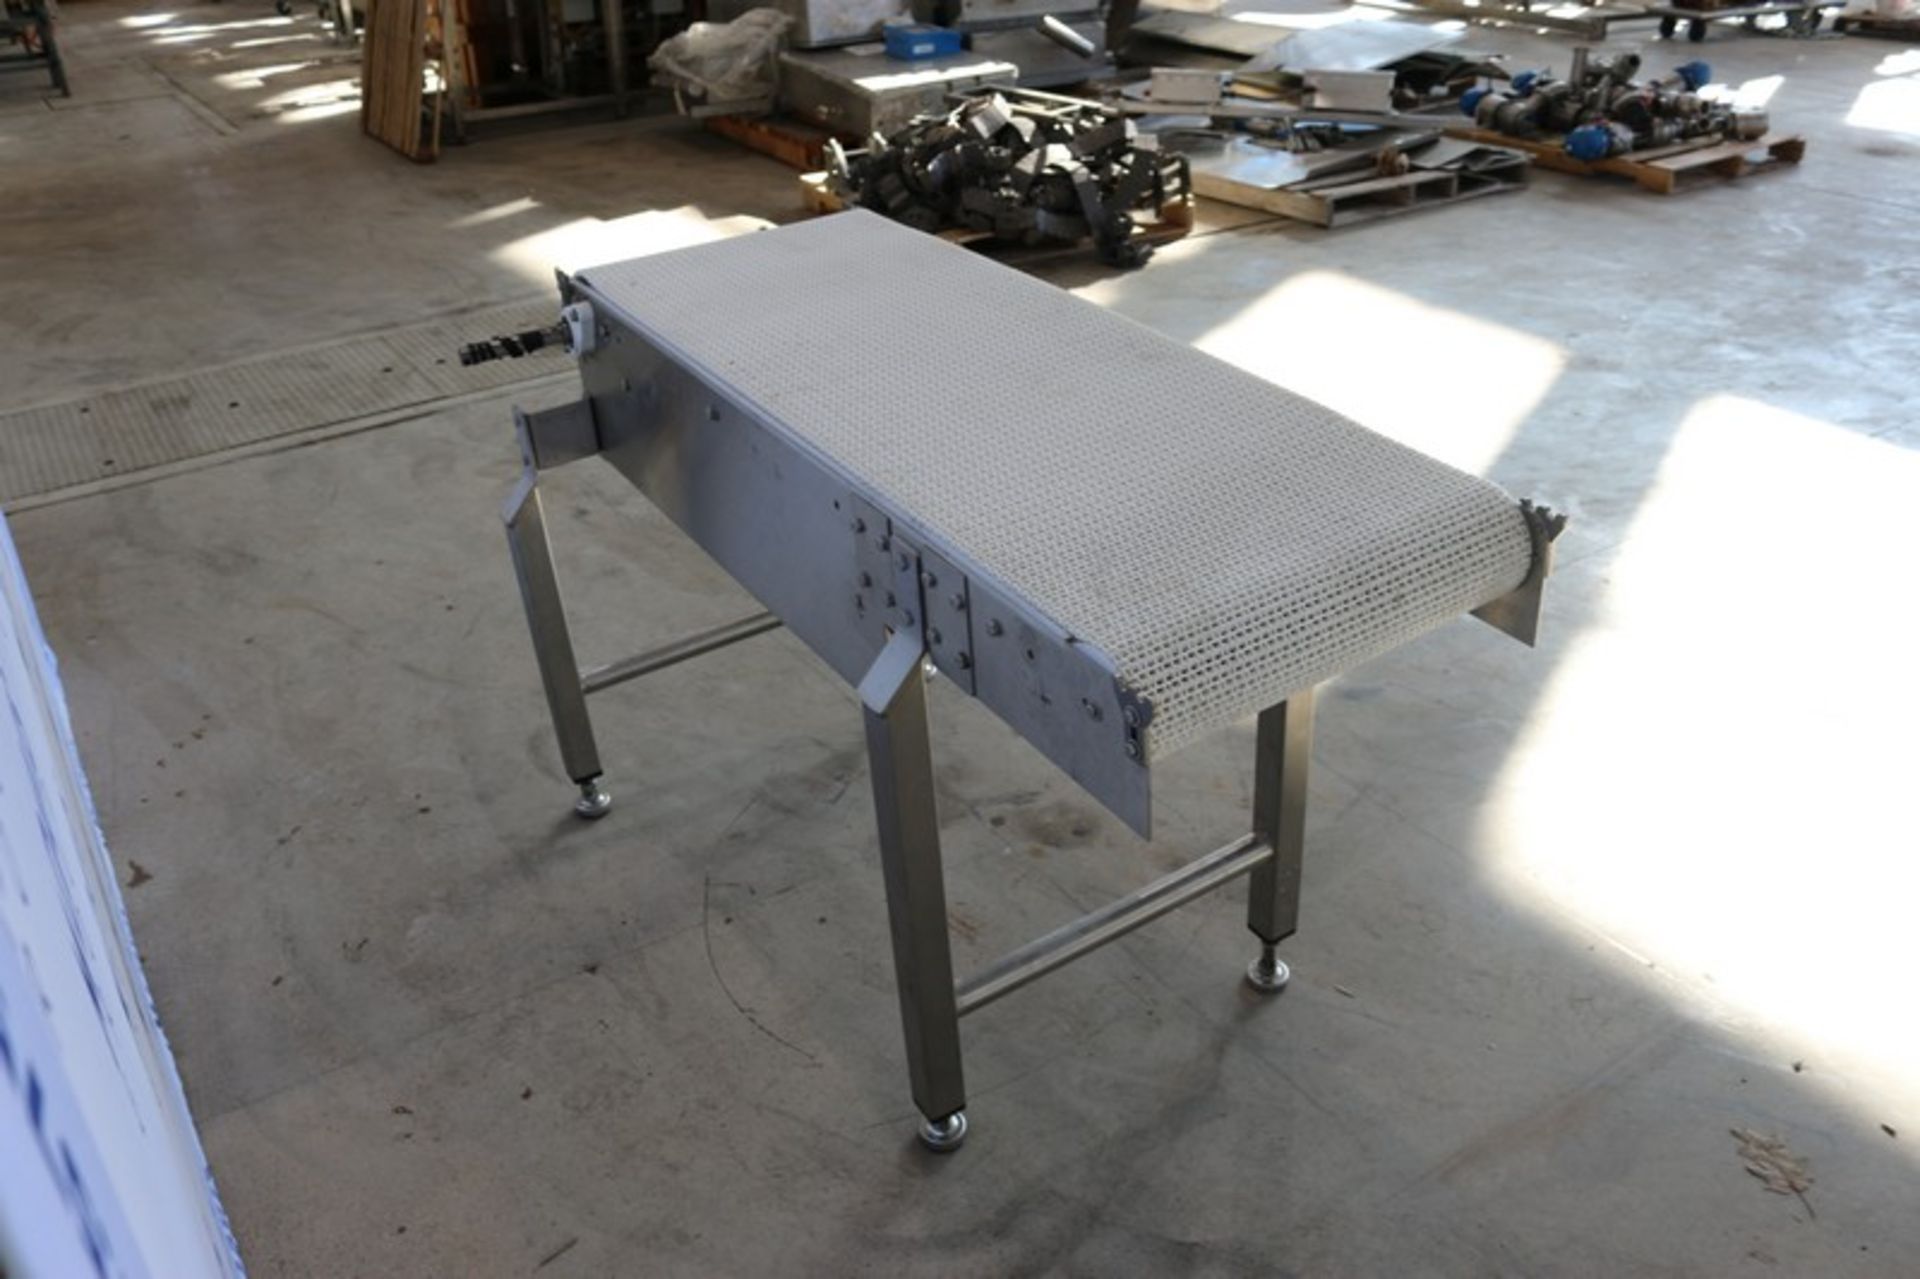 Straight Section of S/S Conveyor,with White Interlock Belt, Aprox. 55" L x 18" H Belt, Mounted on - Image 5 of 8